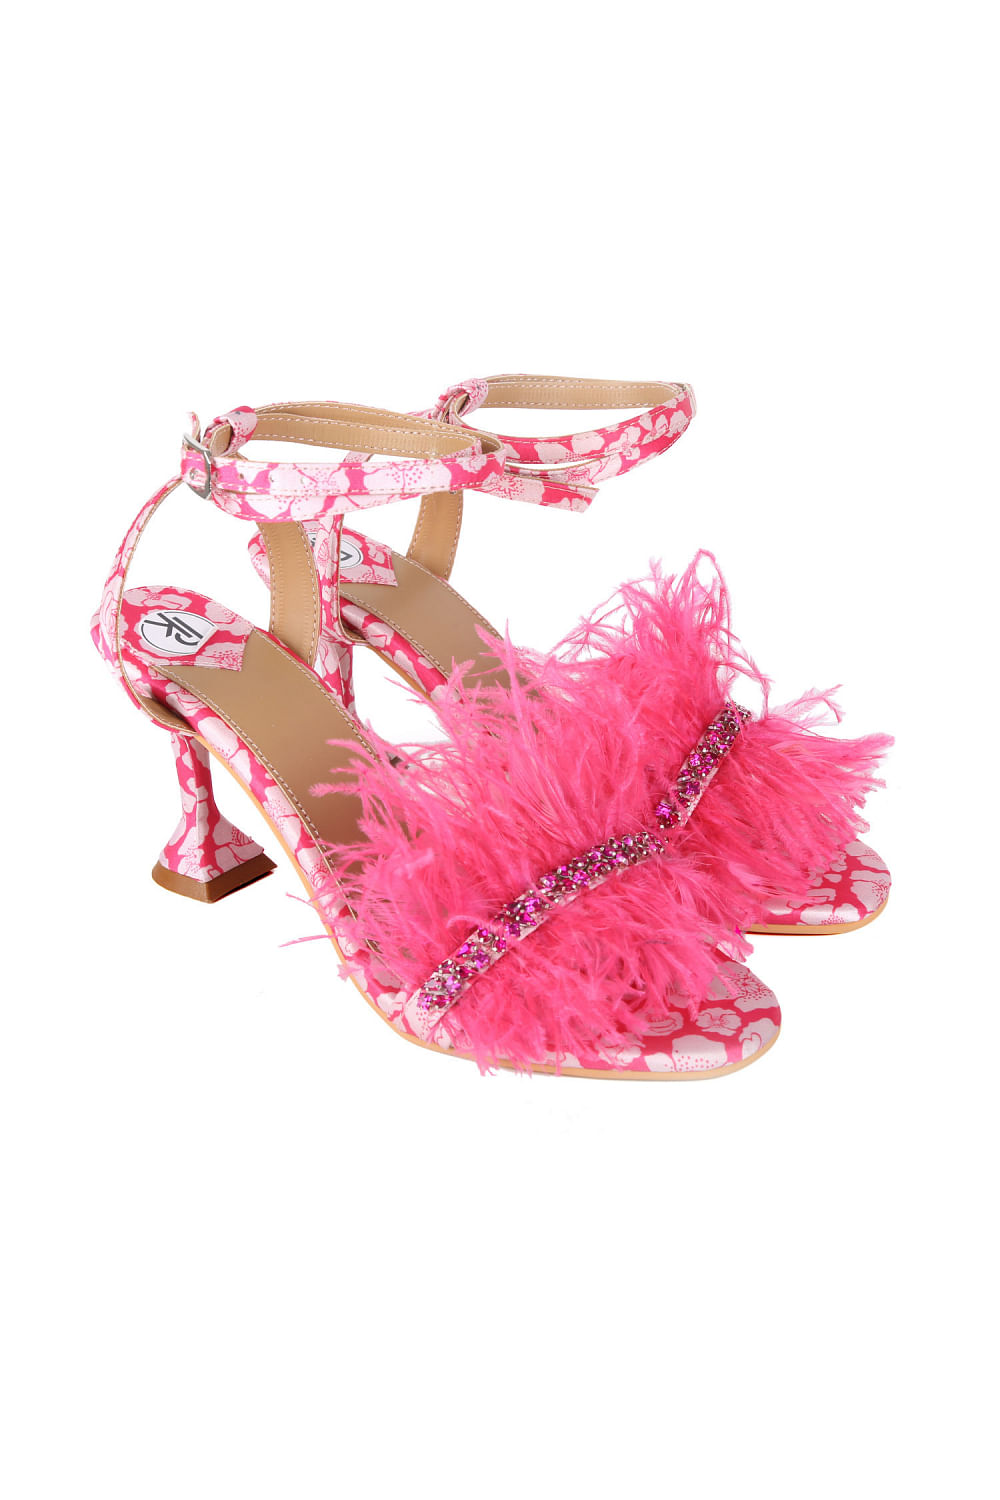 AZALEA WANG CLEASBY FEATHER SANDAL IN PINK